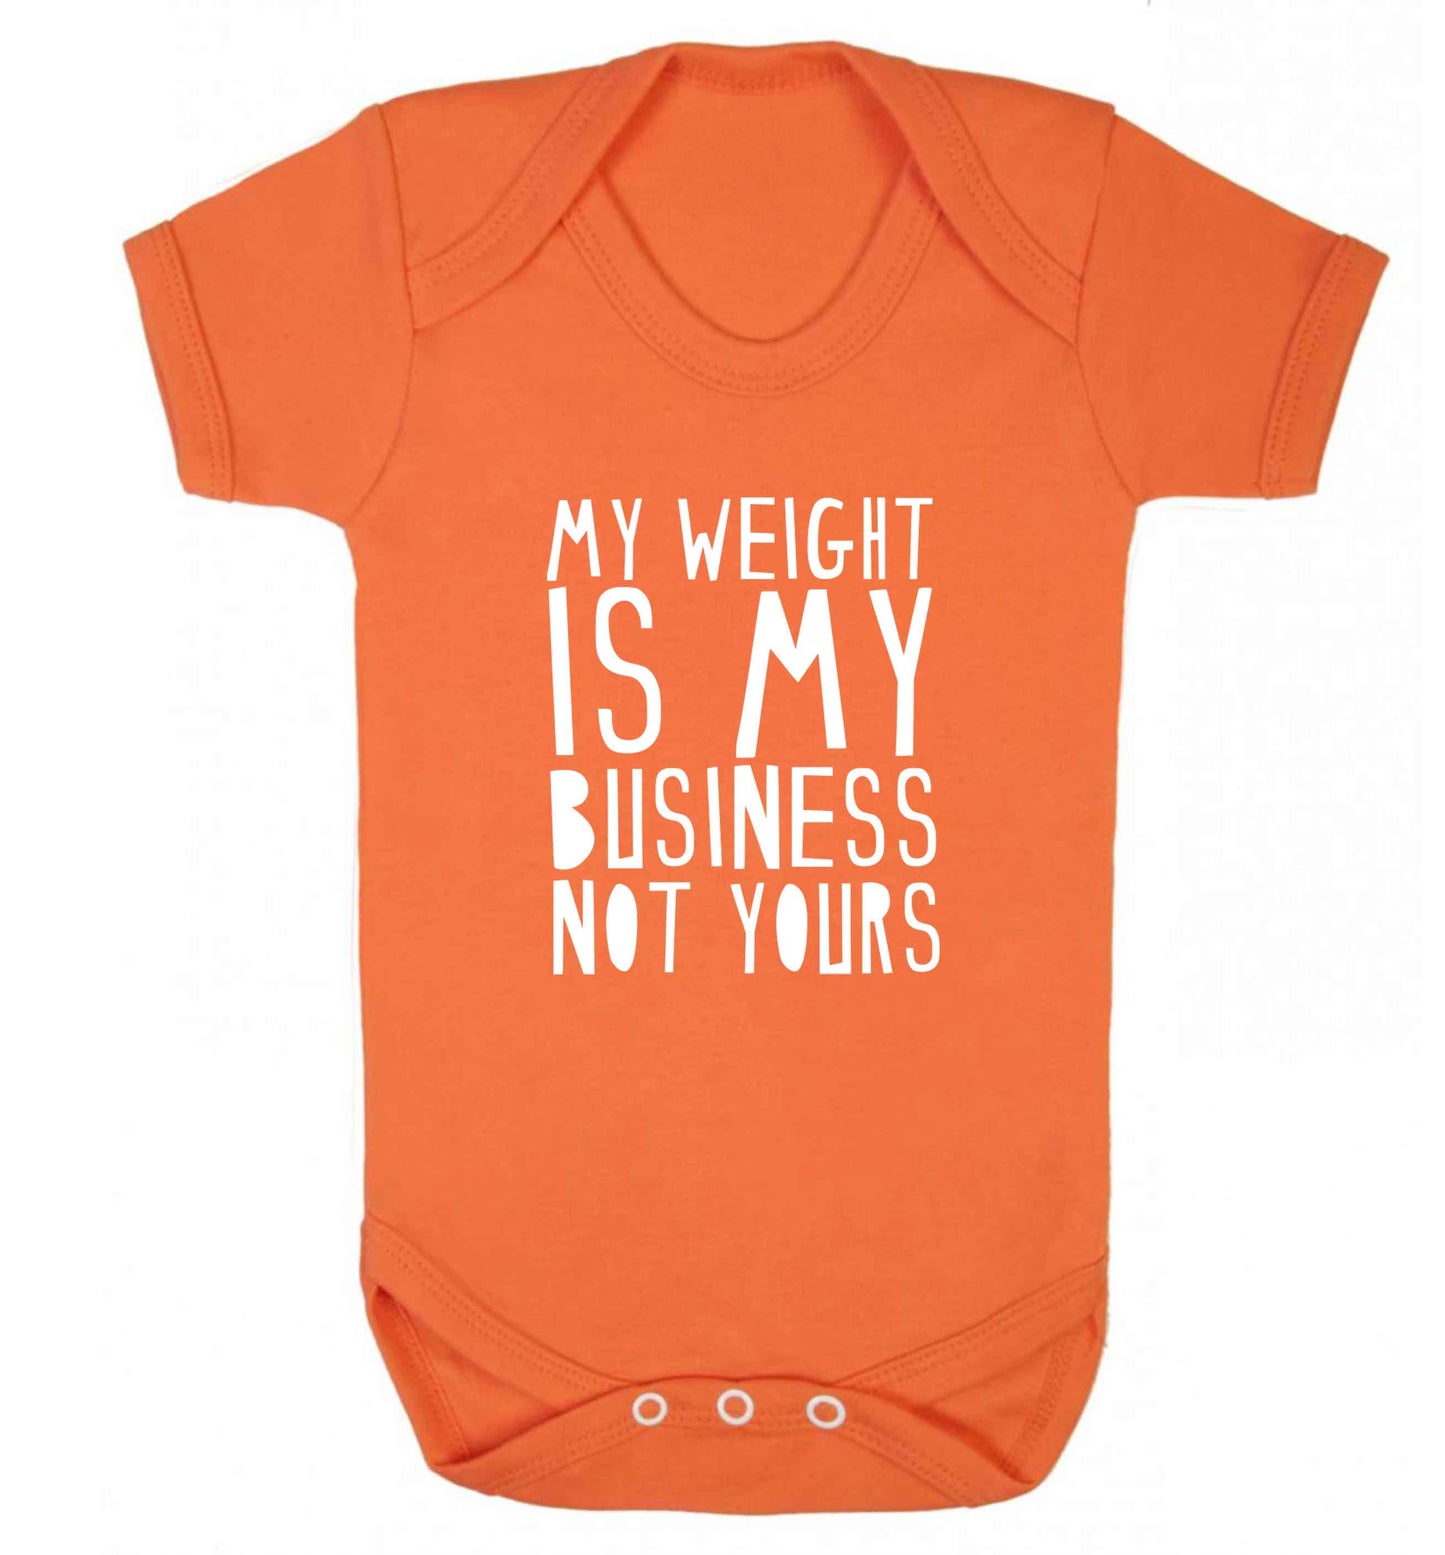 My weight is my business not yours baby vest orange 18-24 months